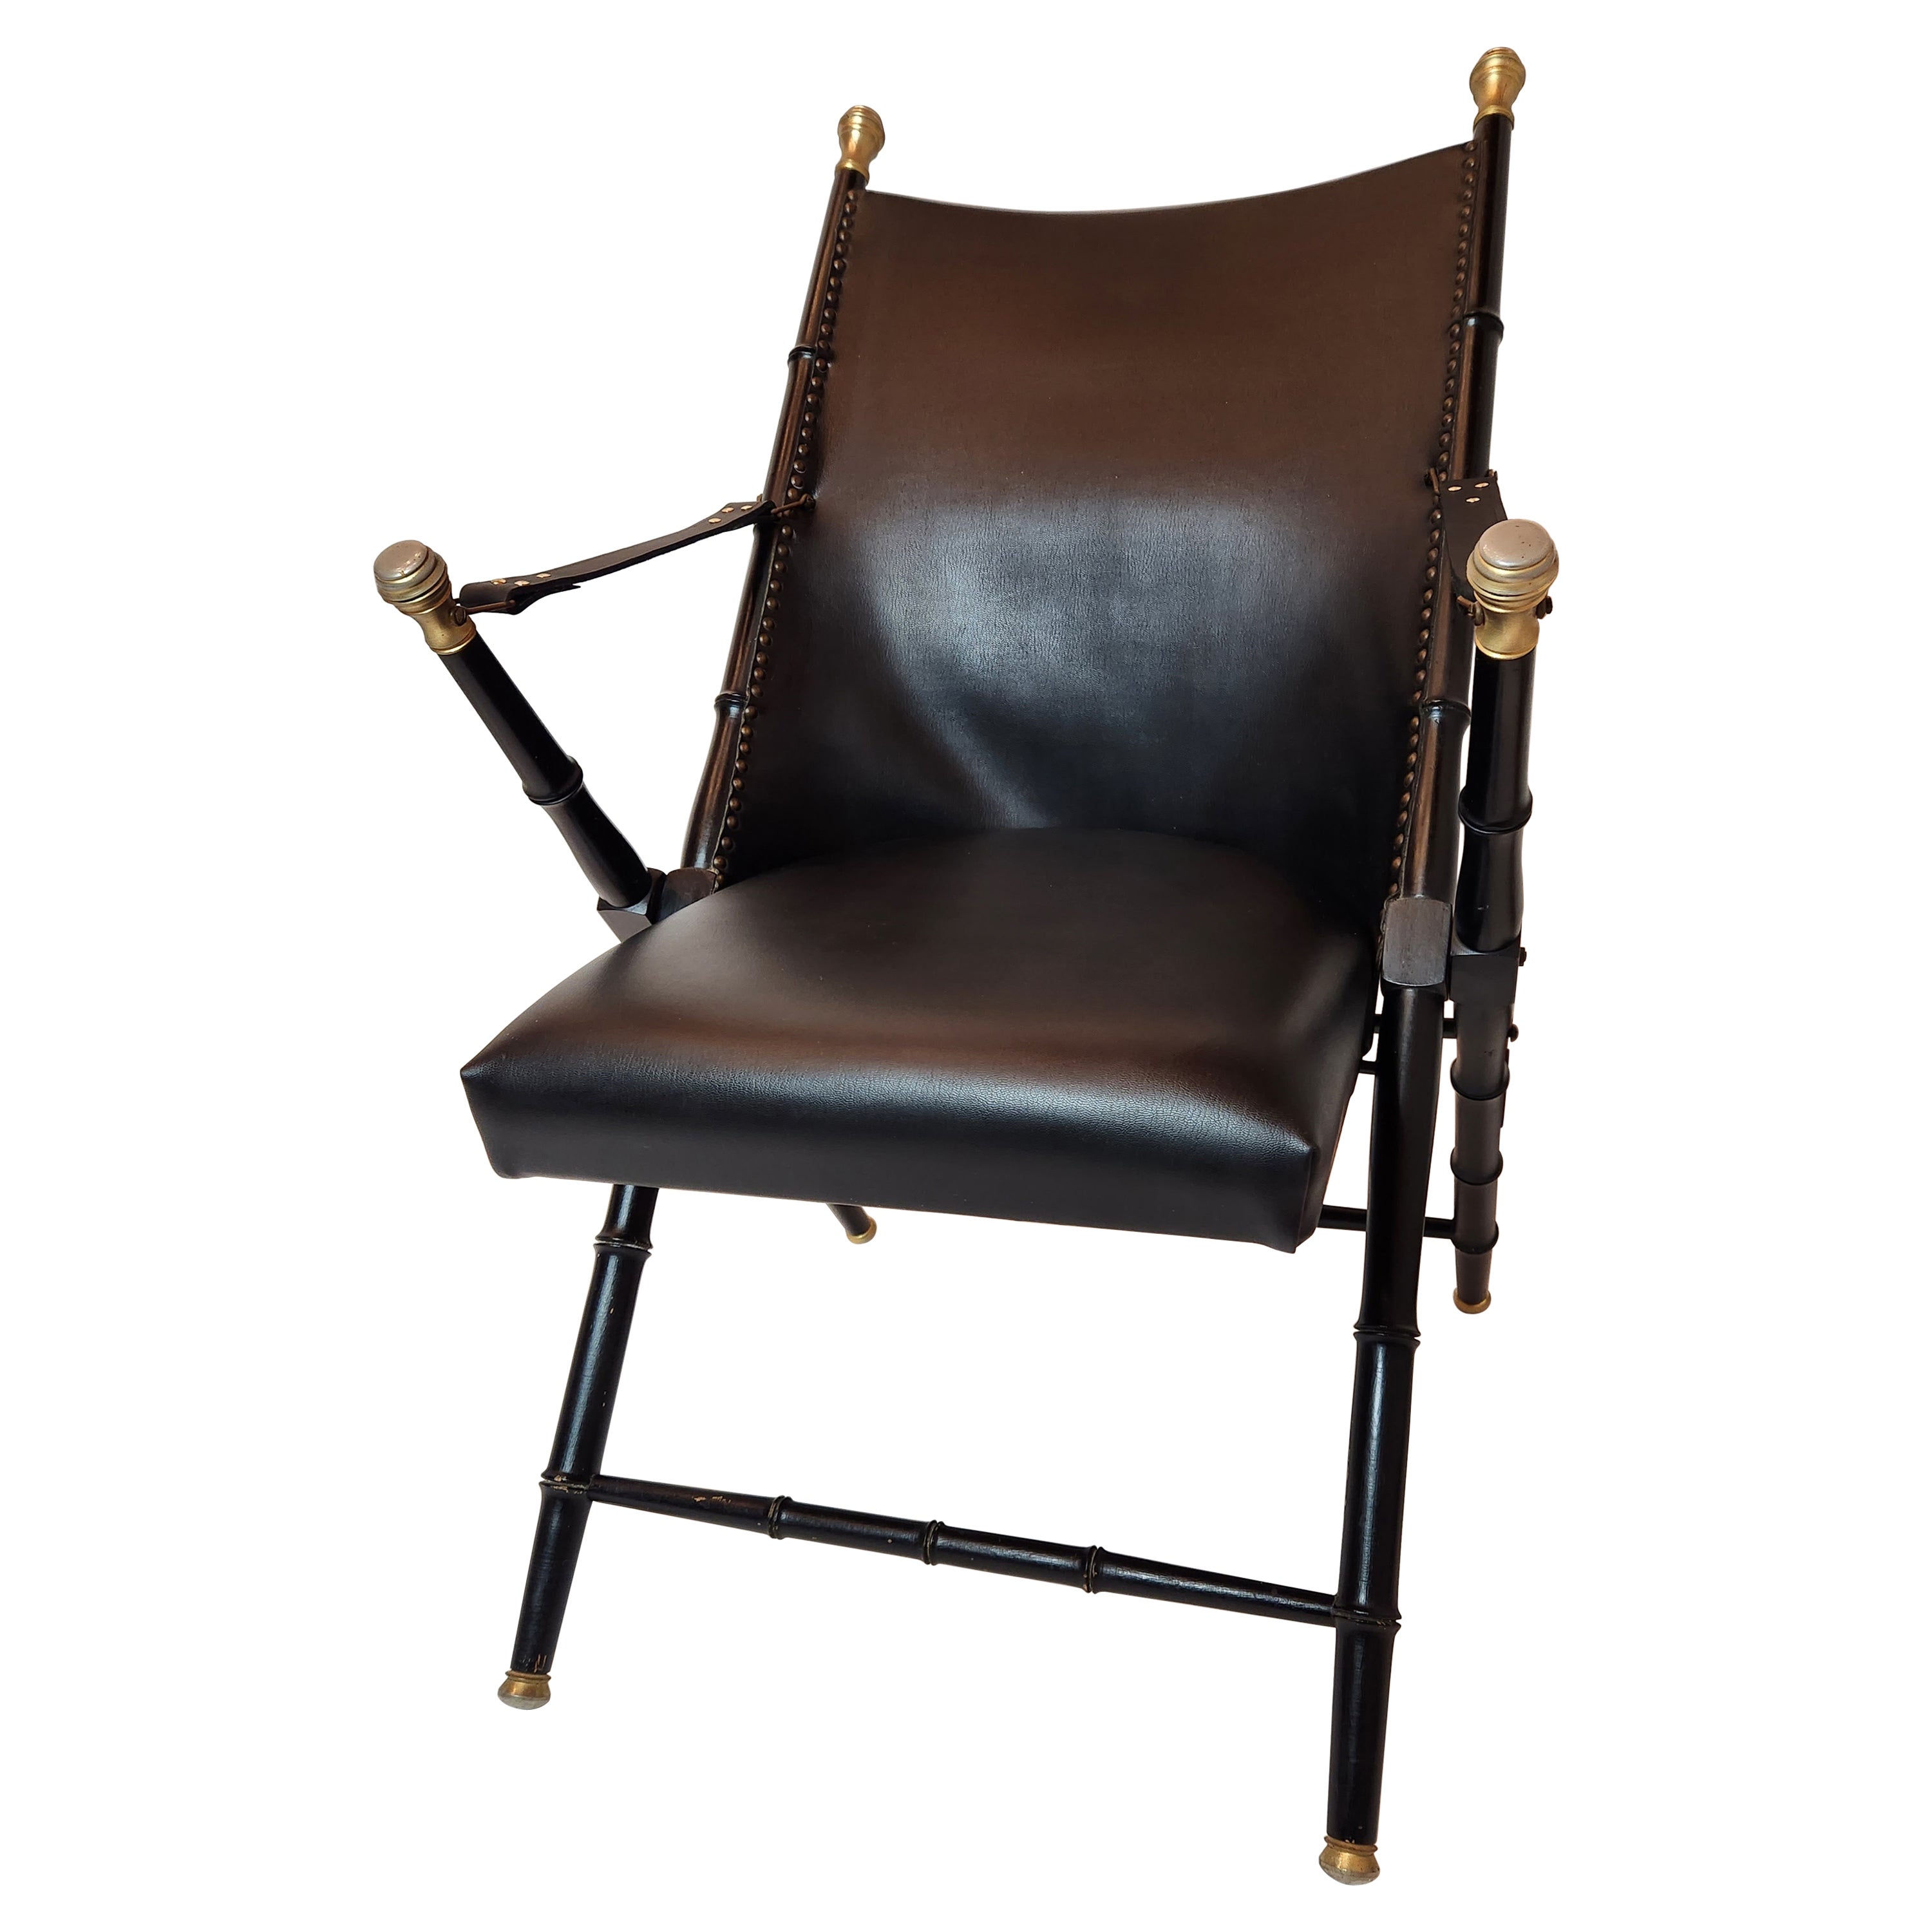 Classic Italian Folding Campaign Chair in Black Leather, C. 1965 For Sale